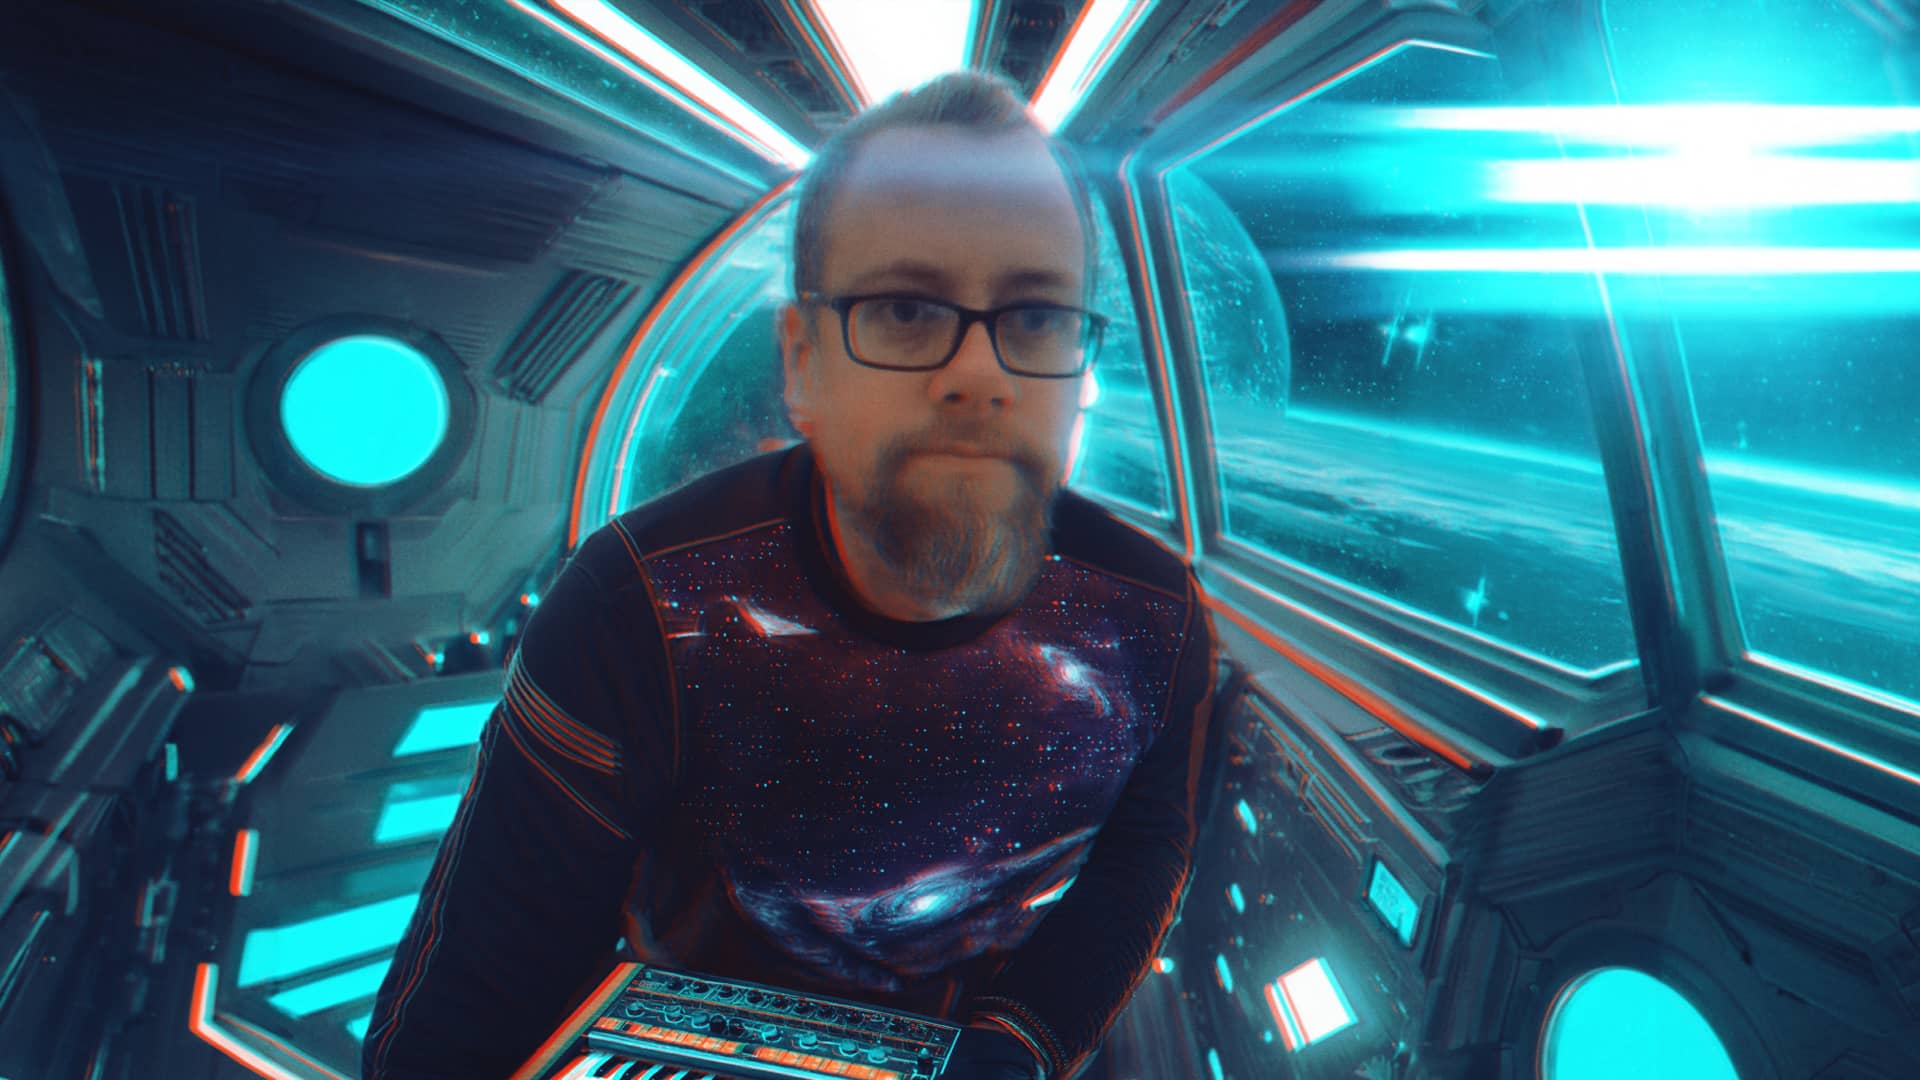 Artist ProjectP in a space-themed outfit inside a futuristic cockpit.